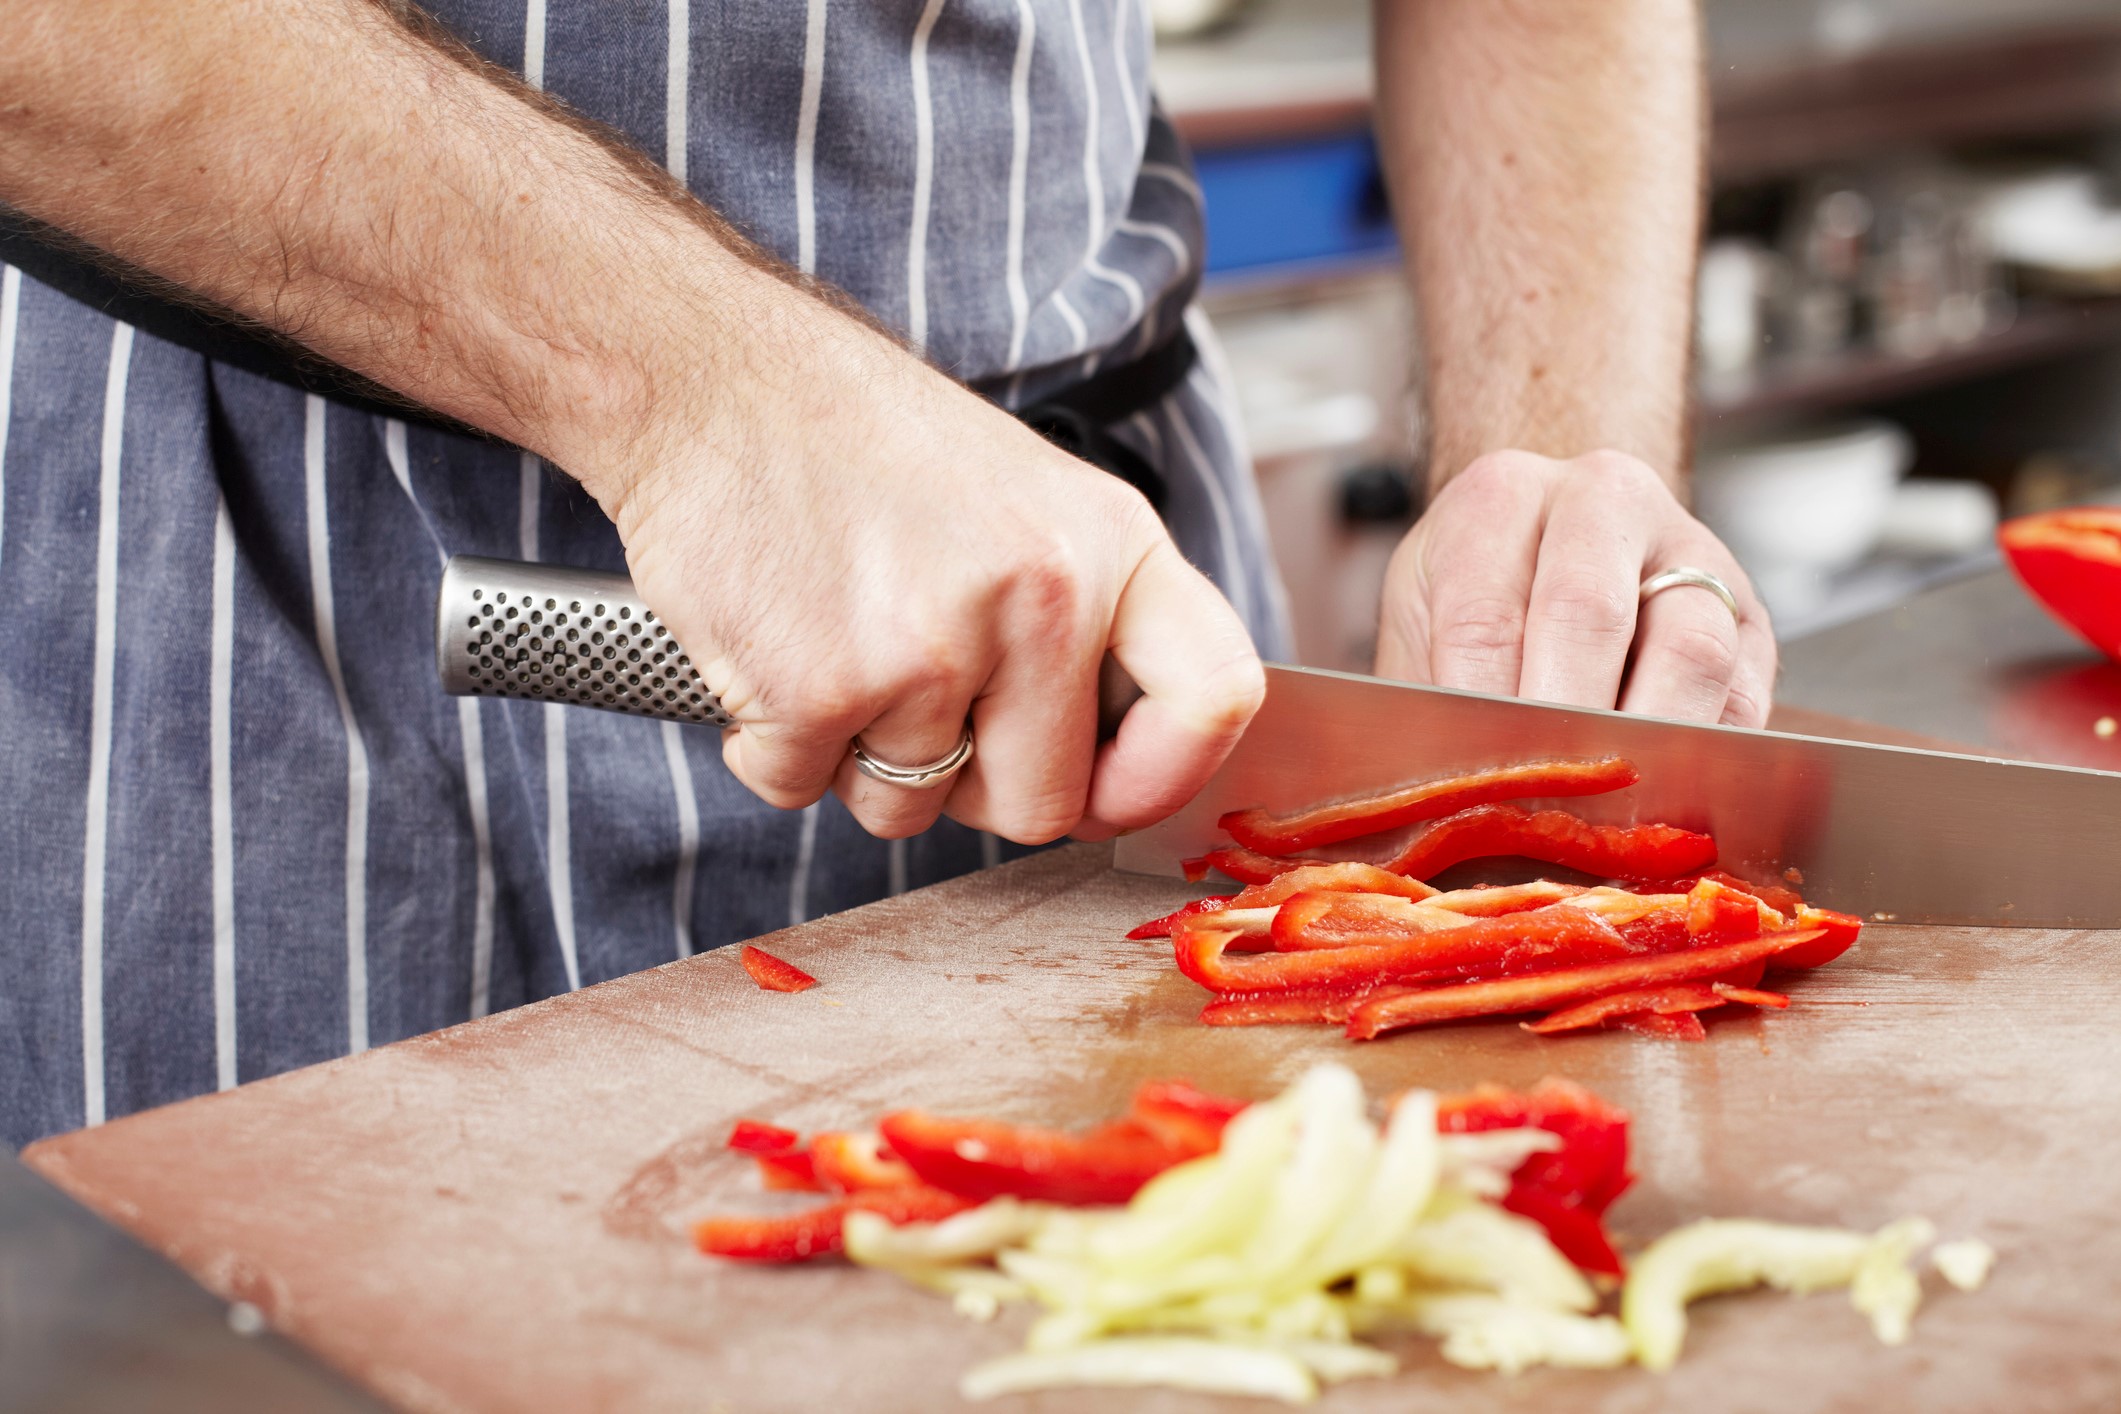 8 great affordable knives to gift your favorite cooking enthusiast